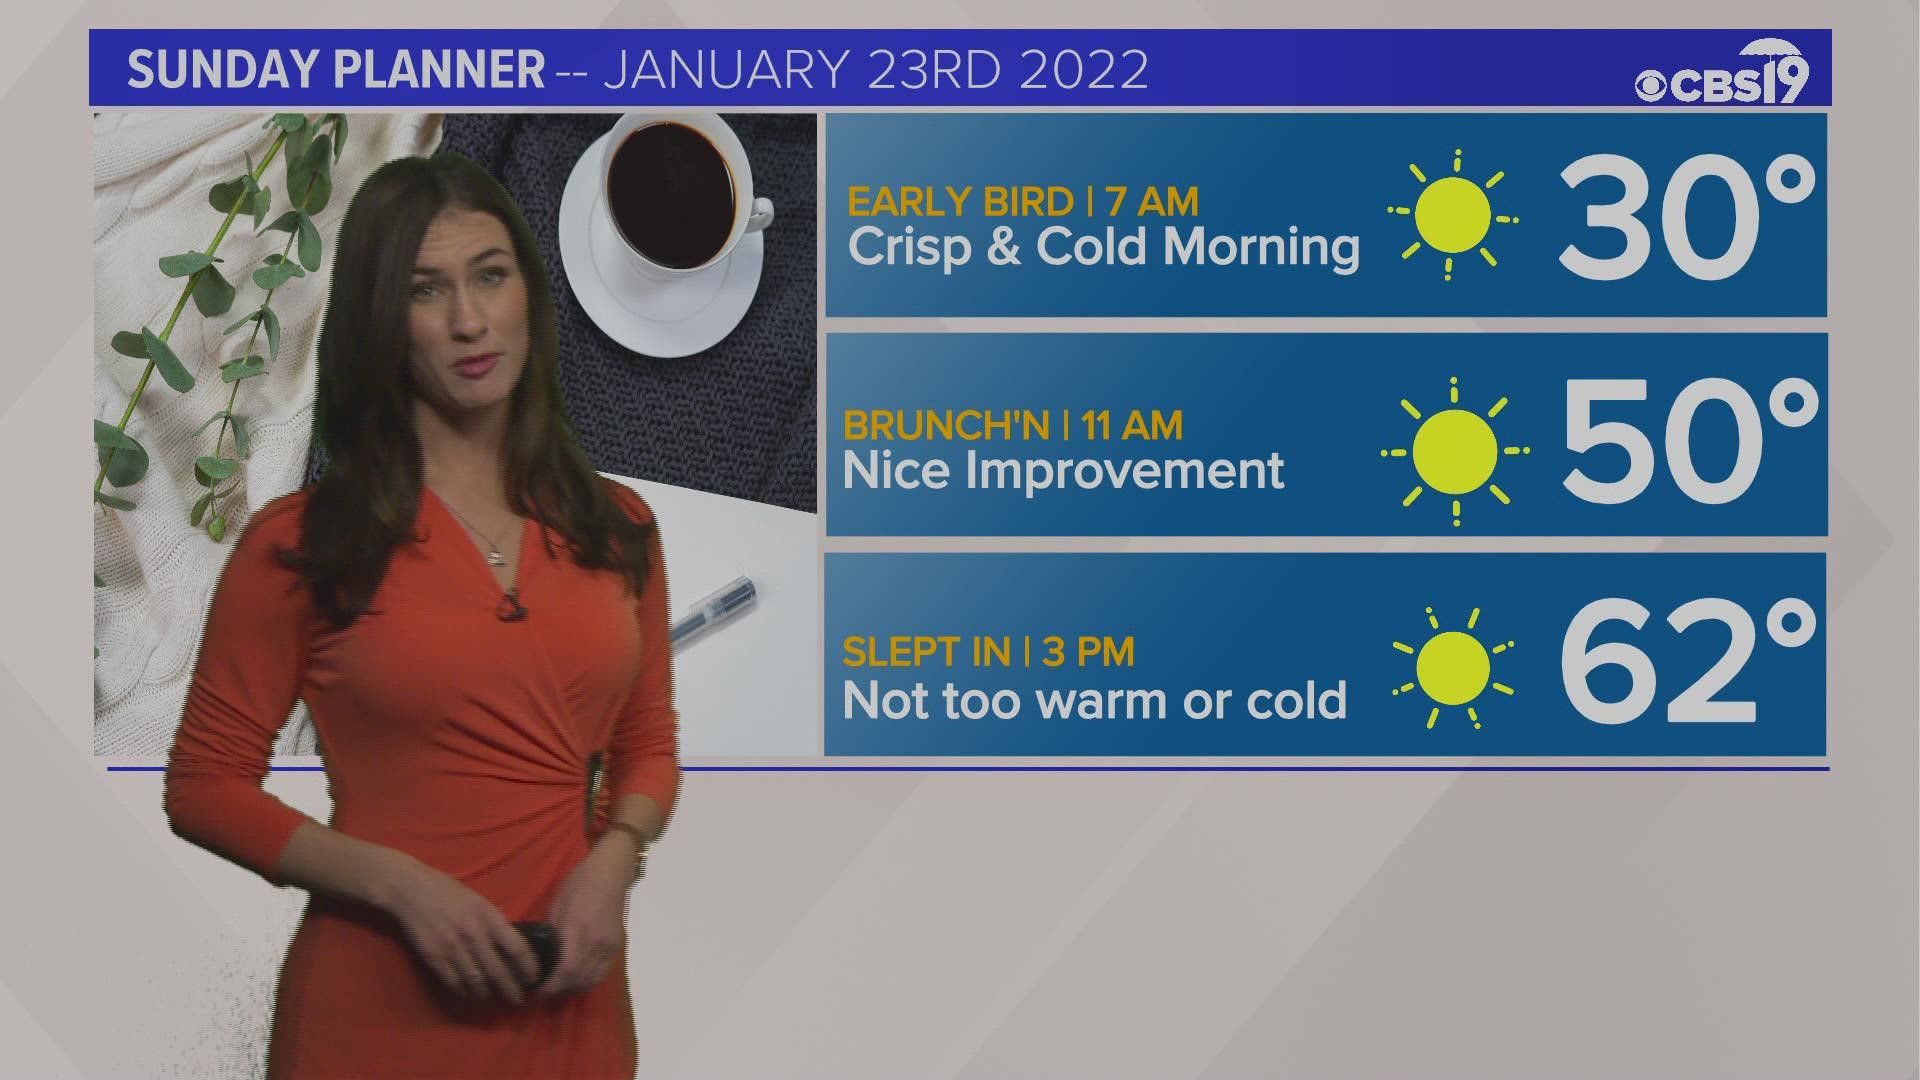 Sunday will start off cold but the afternoon will be sunny and seasonable